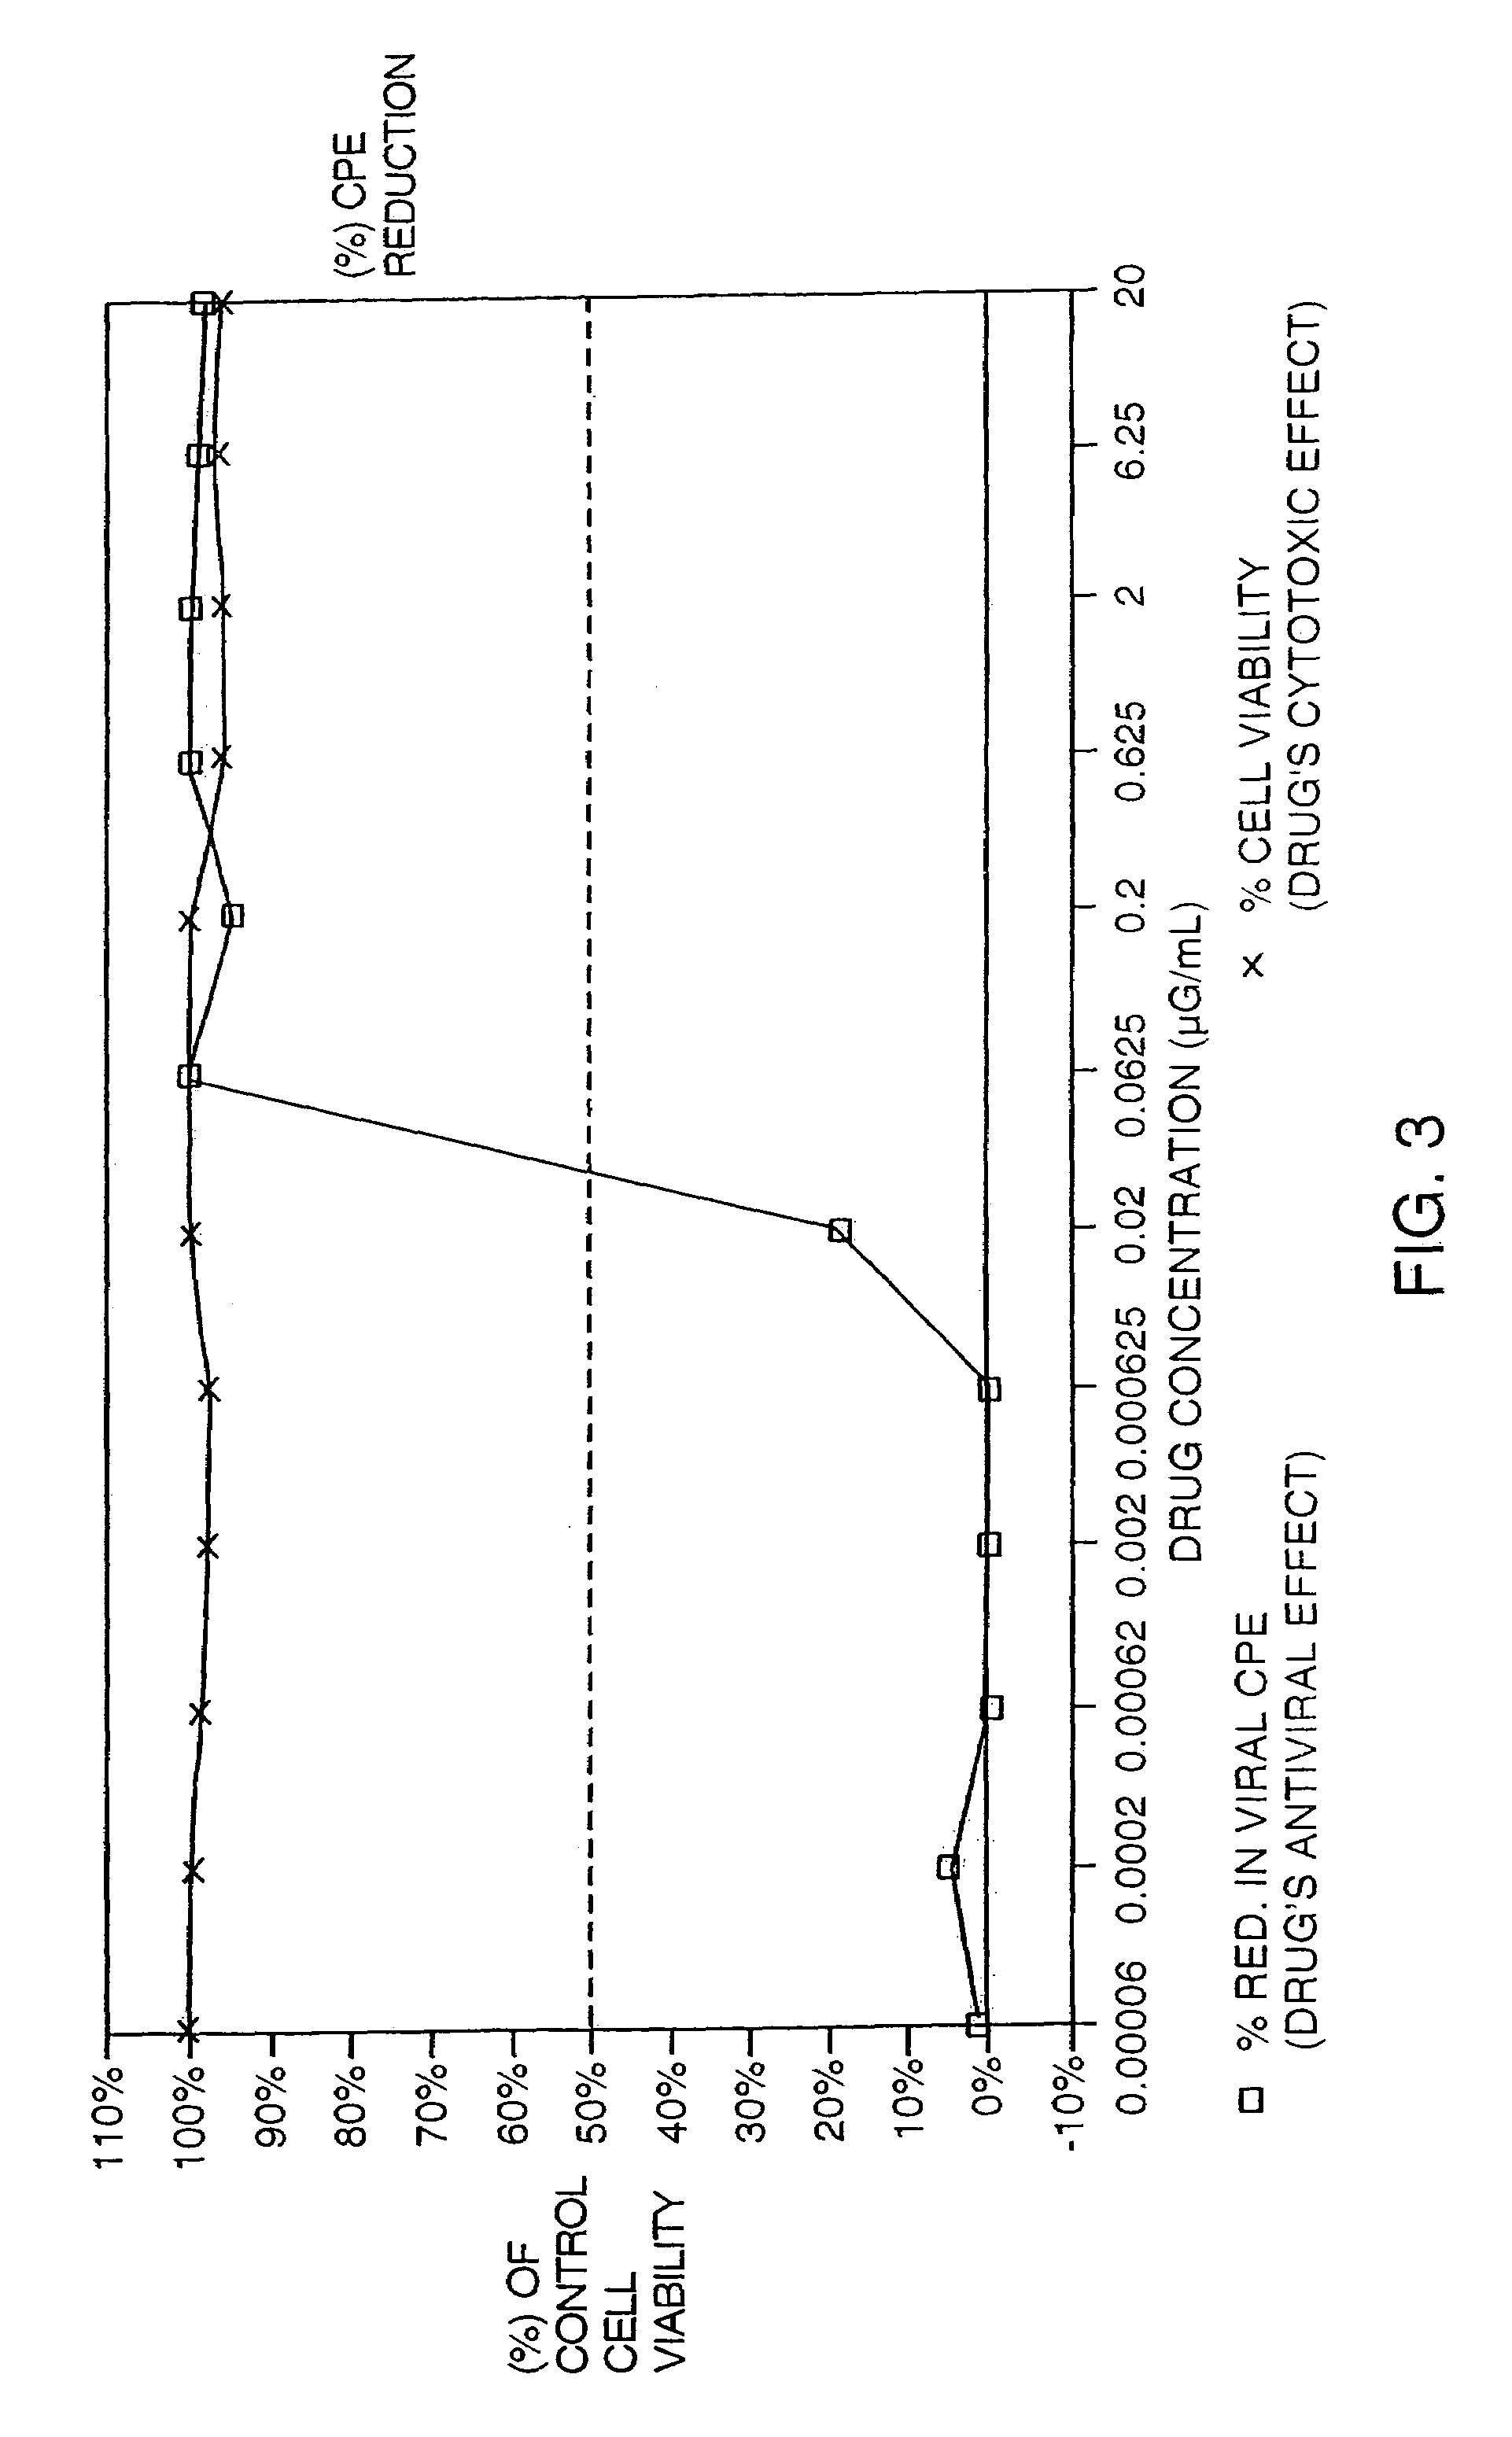 HIV-specific synthetic oligonucleotides and methods of their use